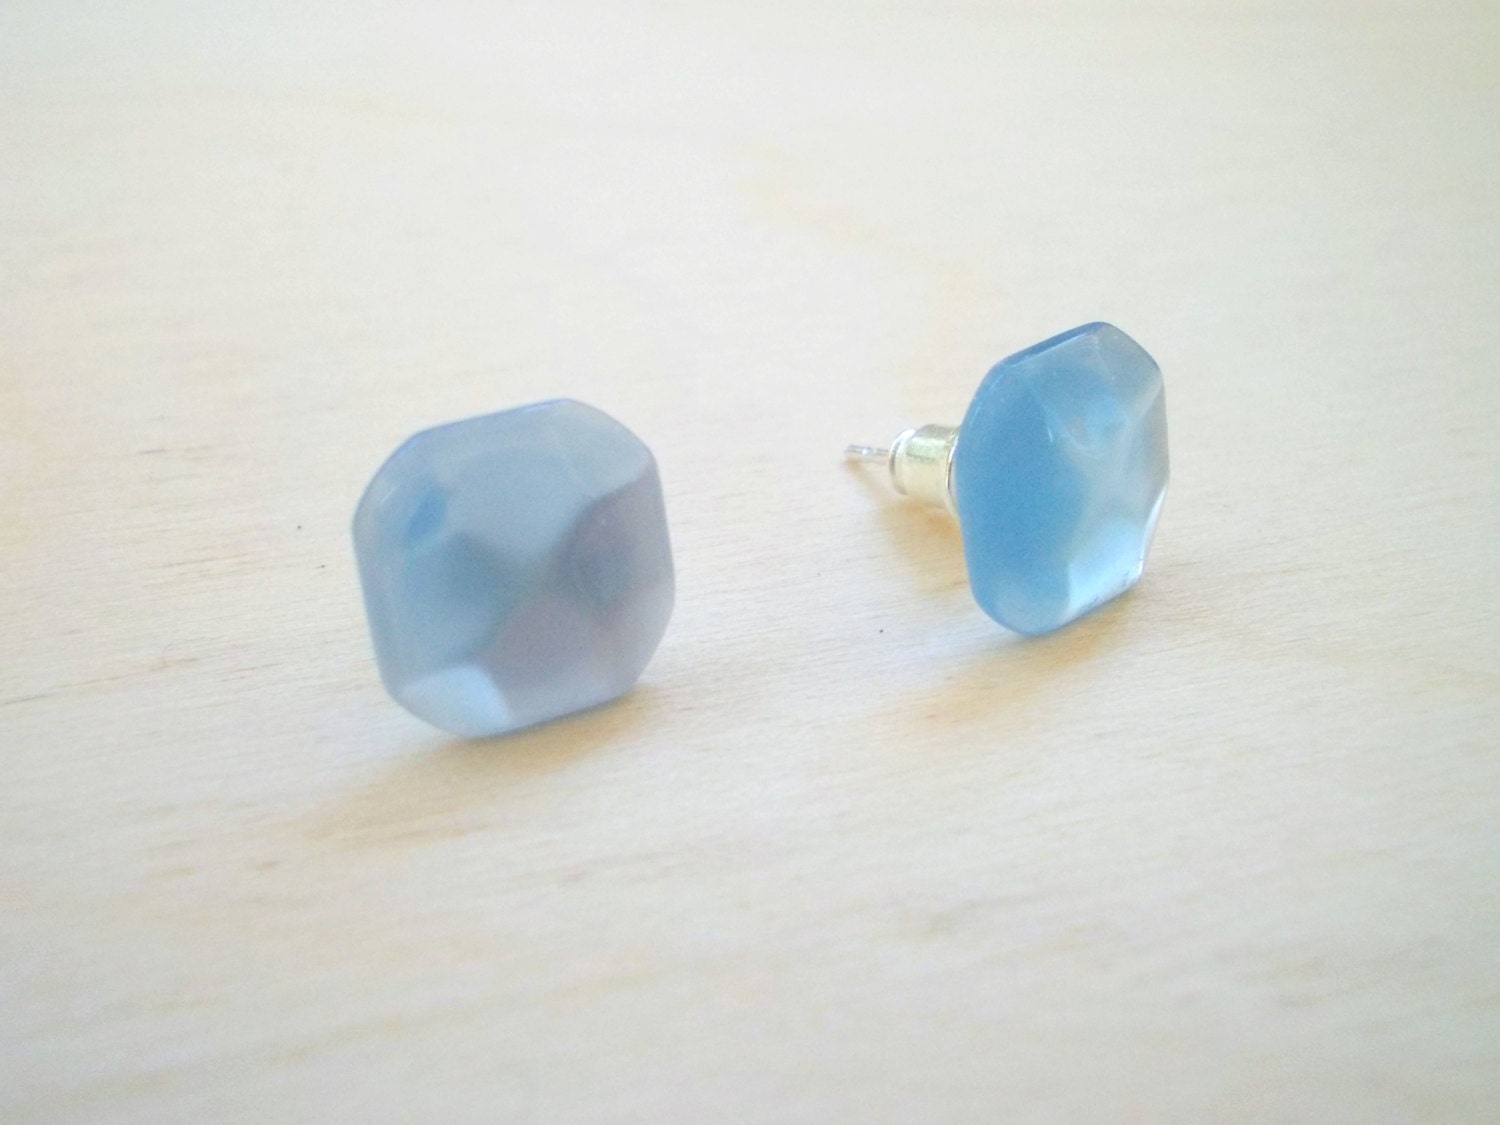 Blue Earring Posts , Light Blue Tiny Cube Earrings Studs , Geometry Fashion, Everyday Jewelry, Under 15 20 25 - EfZinCreations